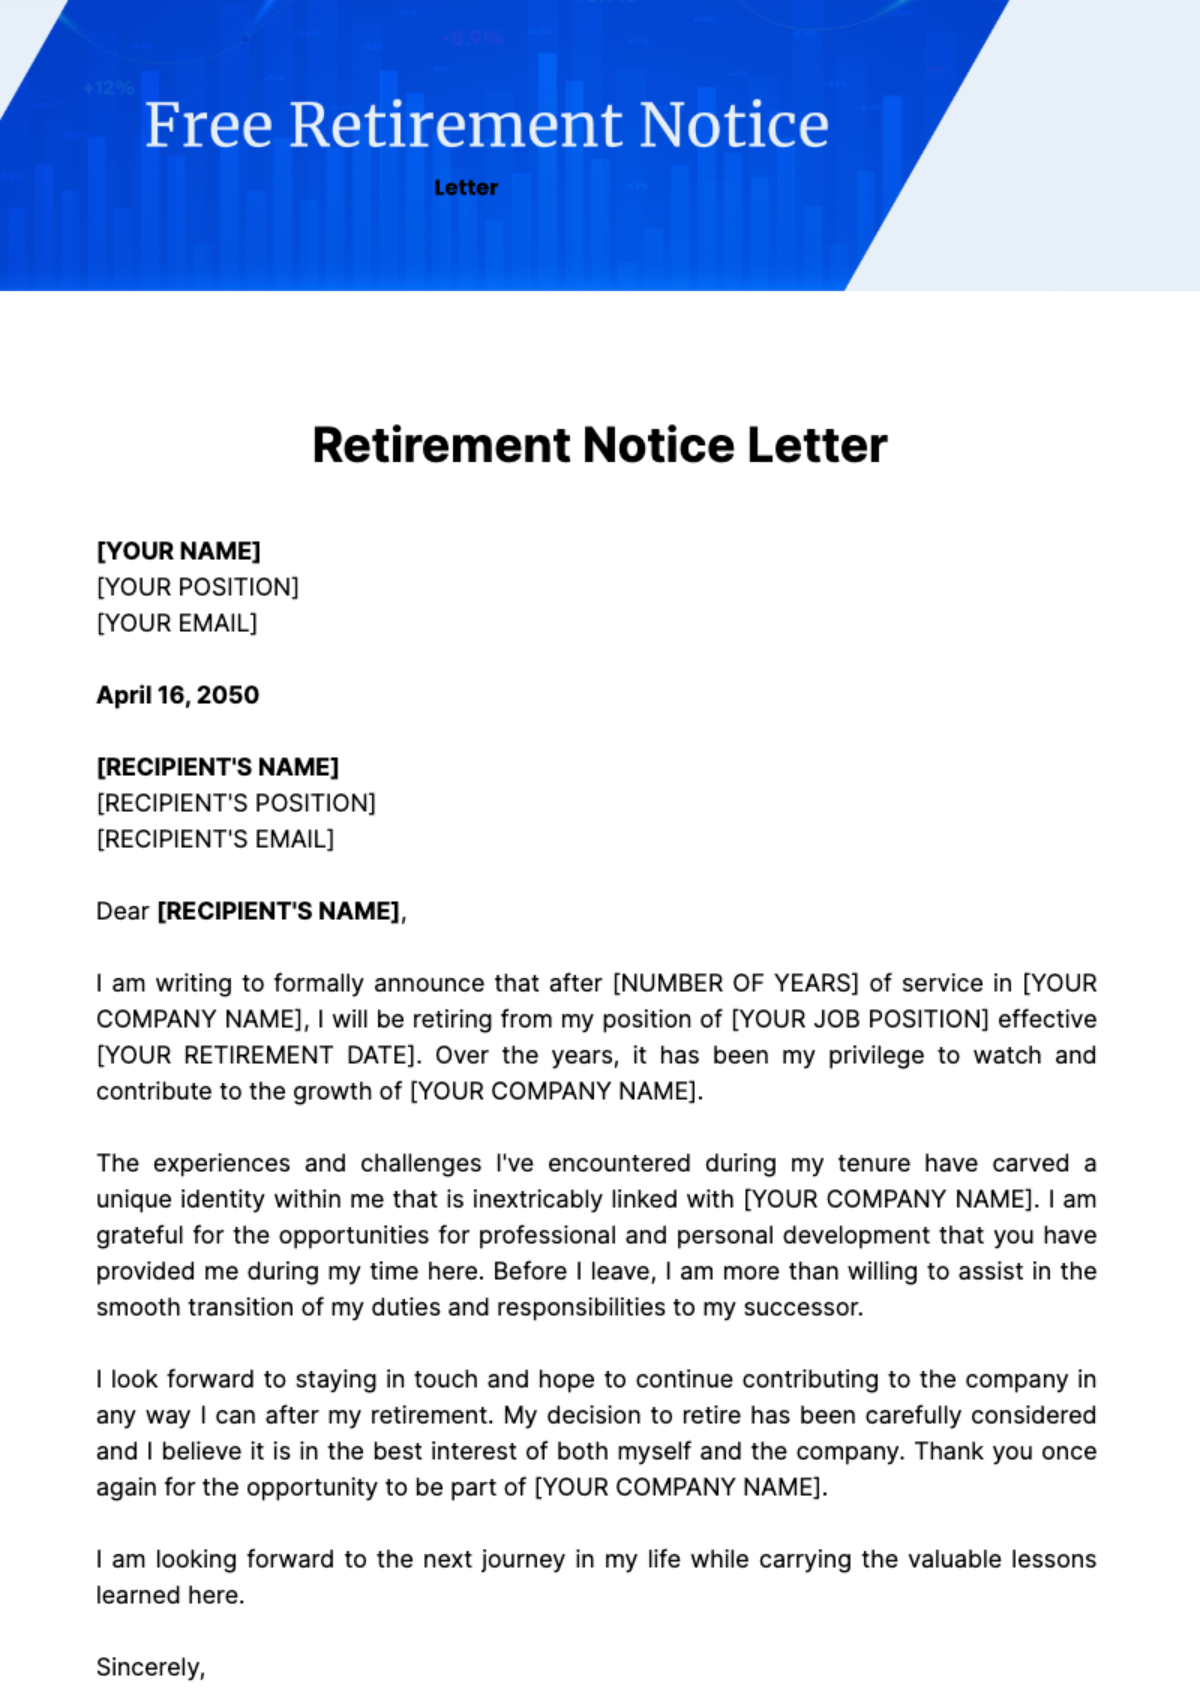 Free Retirement Notice Letter Template